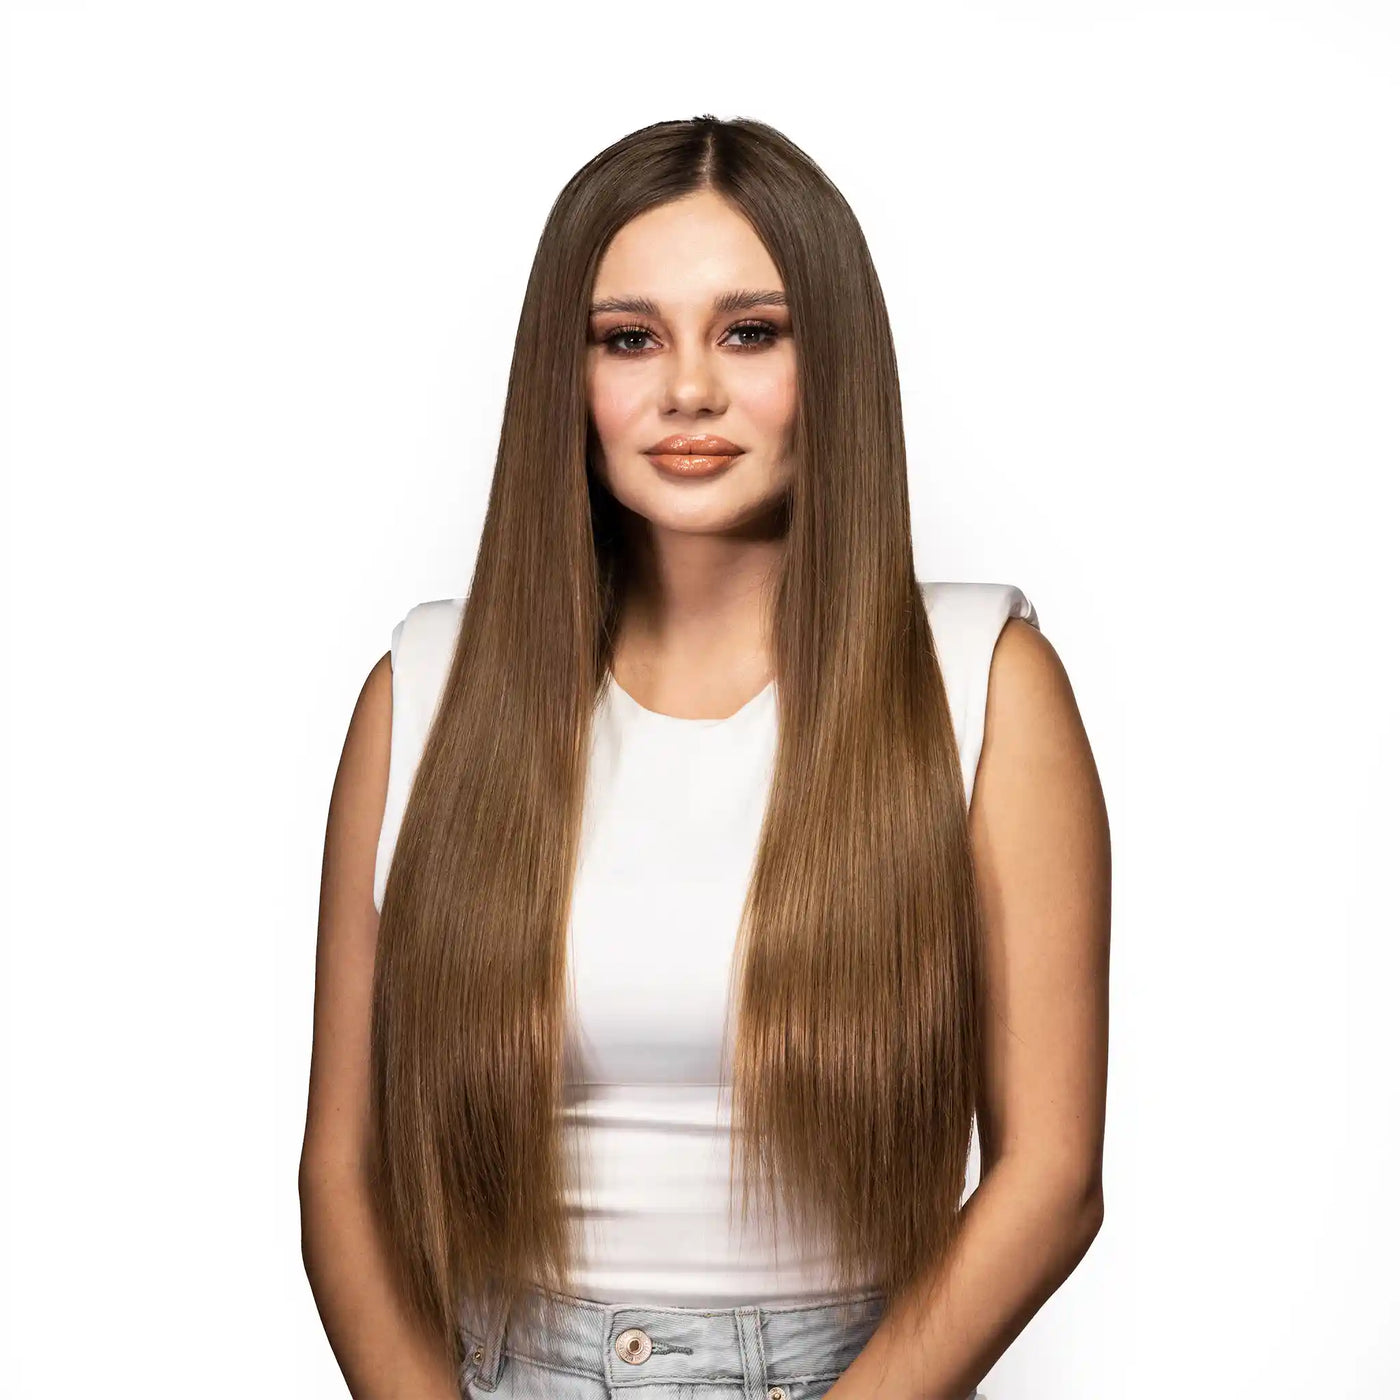 Golden Offer - Clip in Hair Extensions (9 Pieces) 20 inch